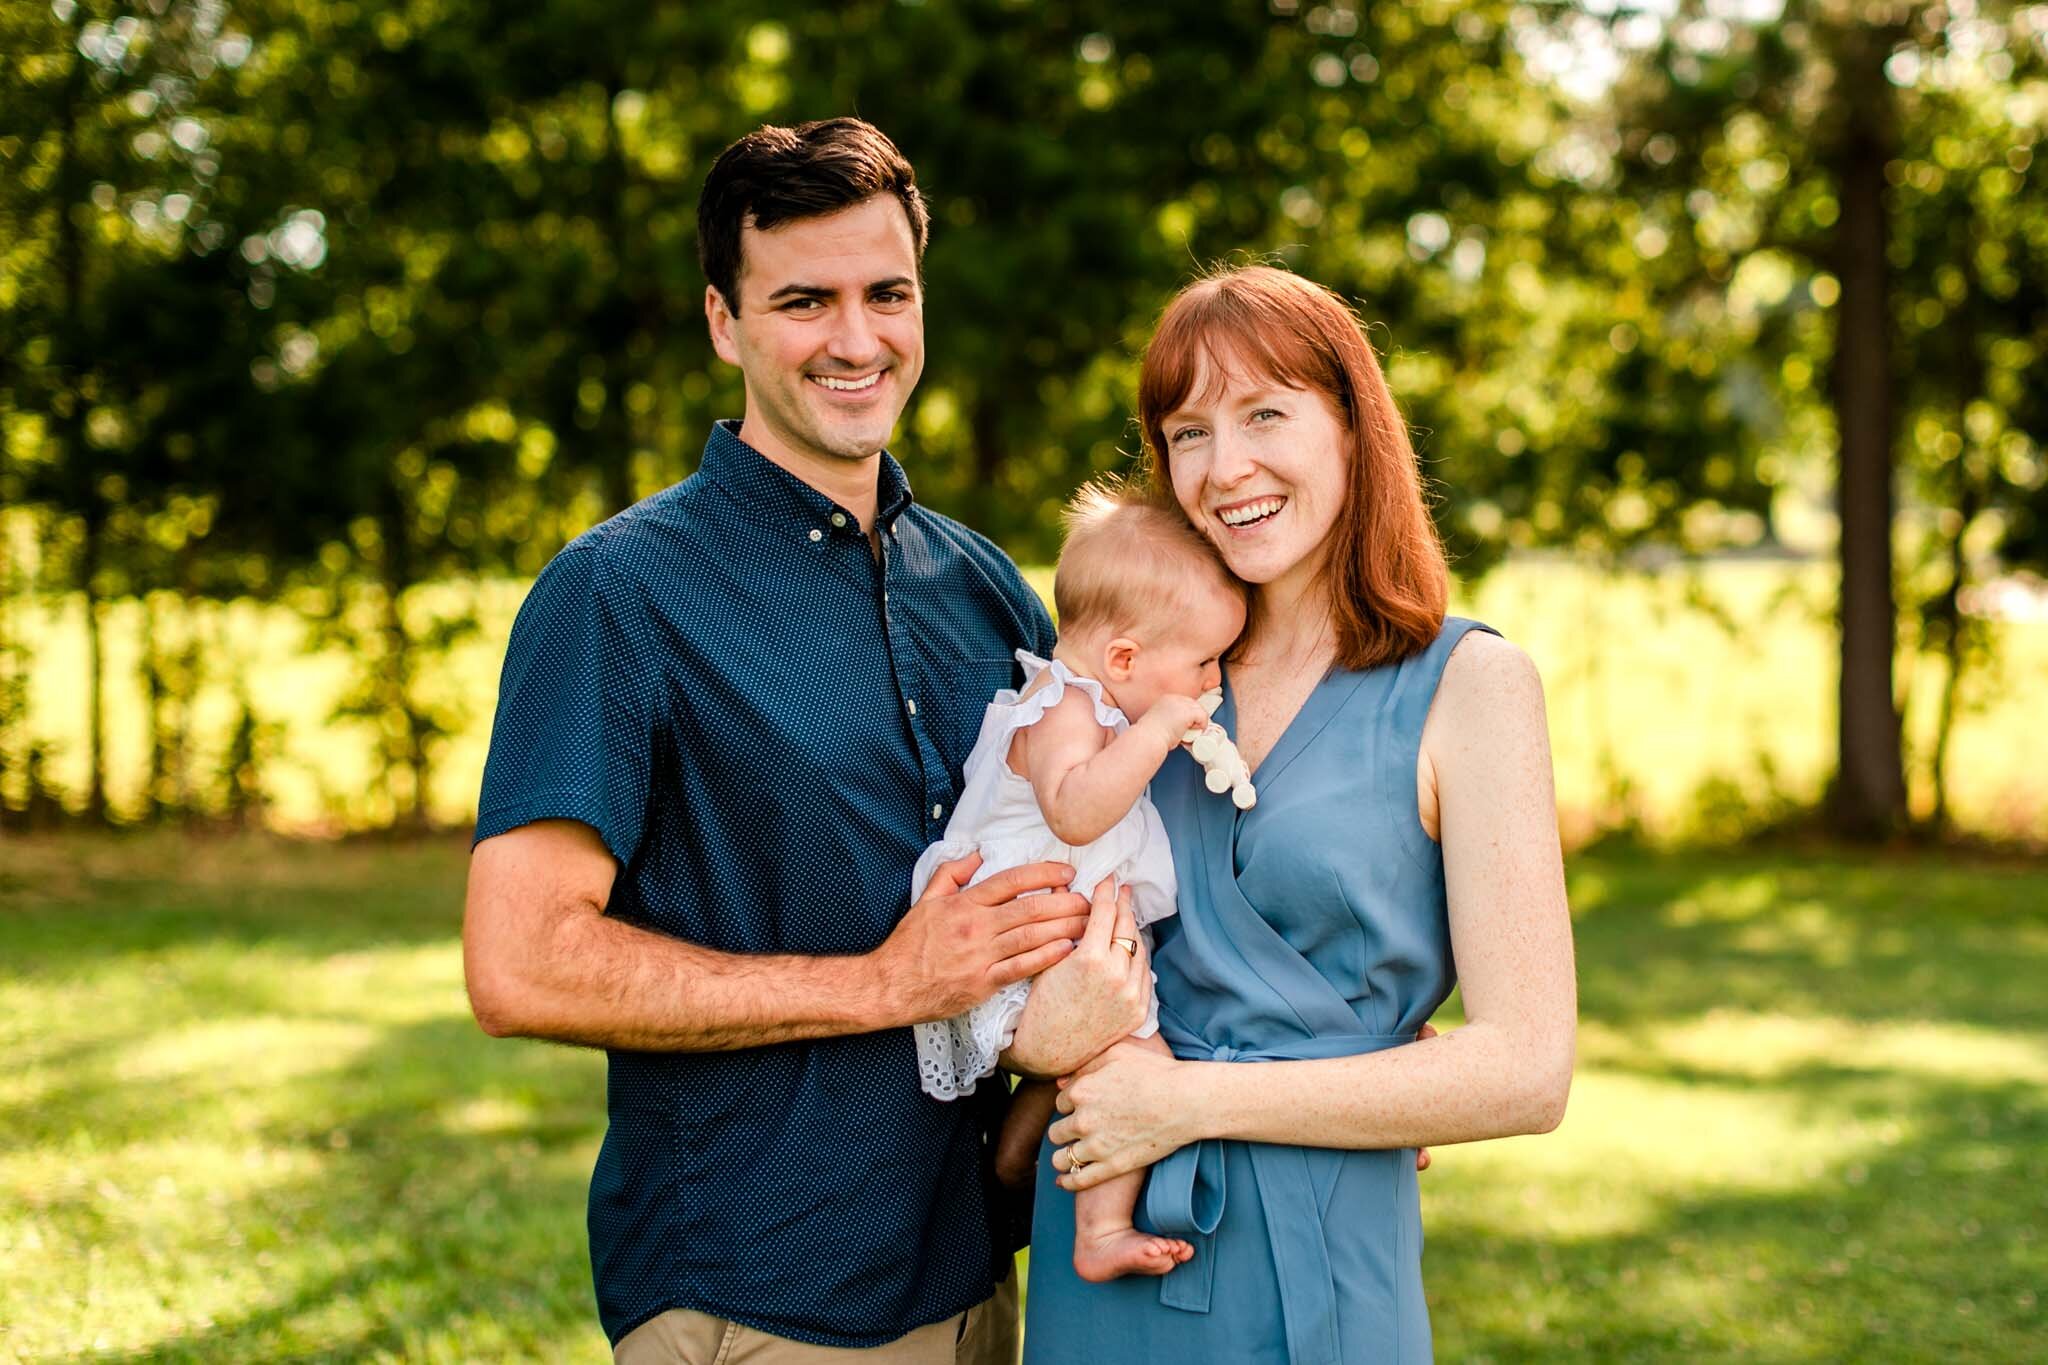 Raleigh Family Photographer | By G. Lin Photography | Dix Park | Morning sunrise family photo shoot